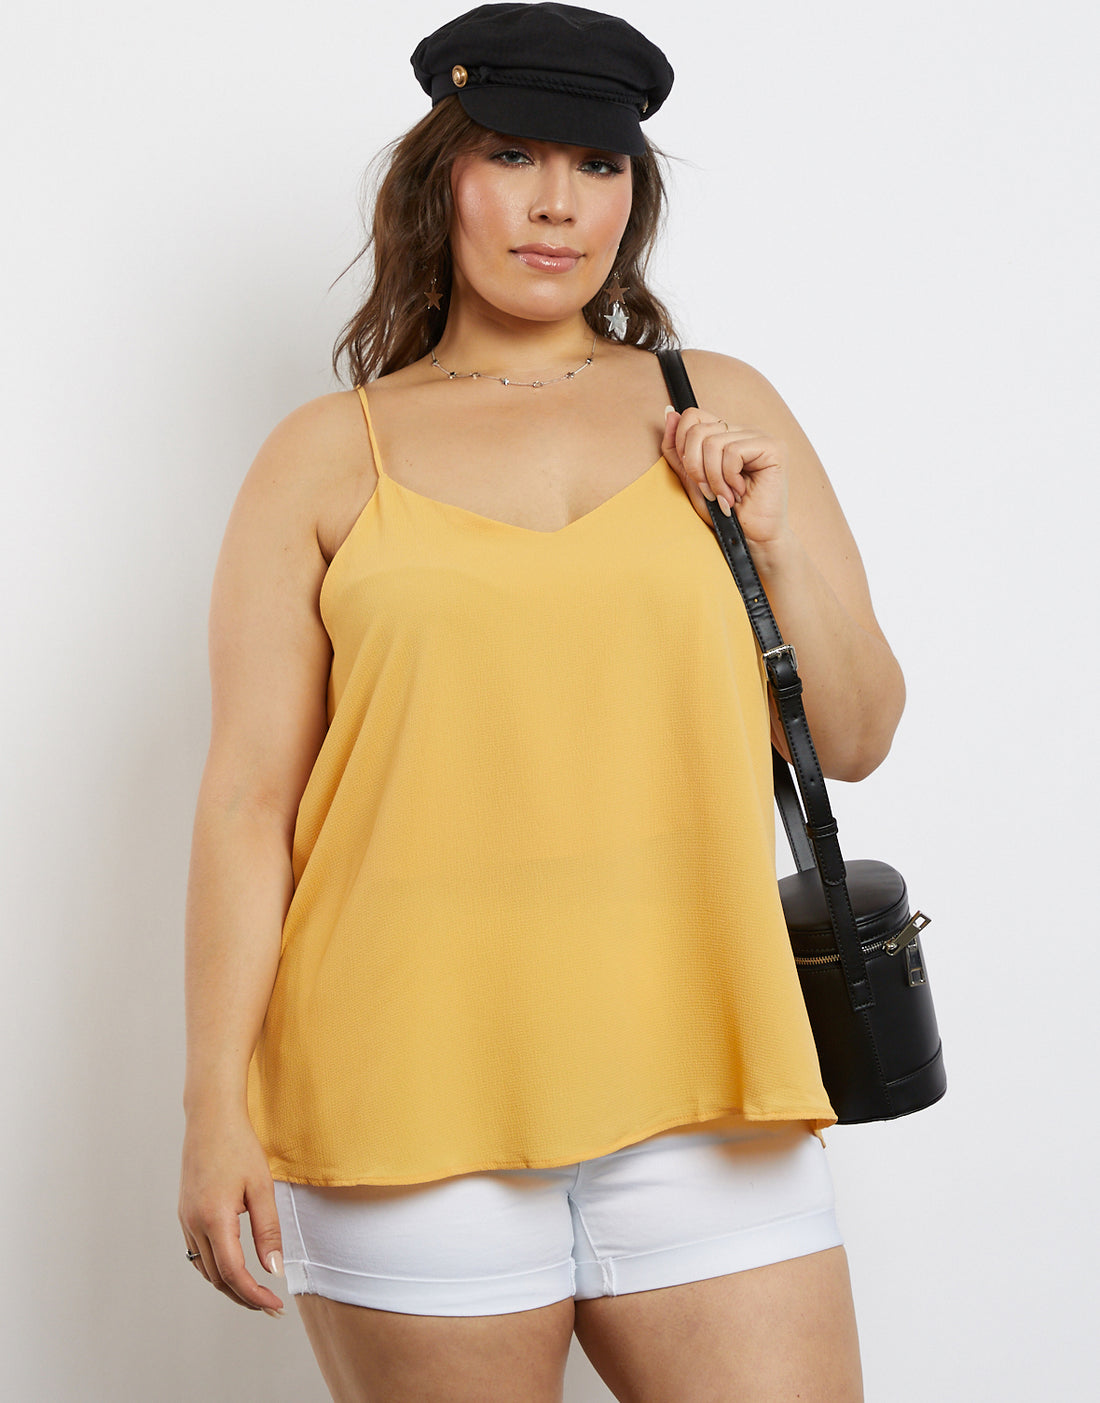 Curve On My Way Tank Top Plus Size Tops Yellow XL -2020AVE